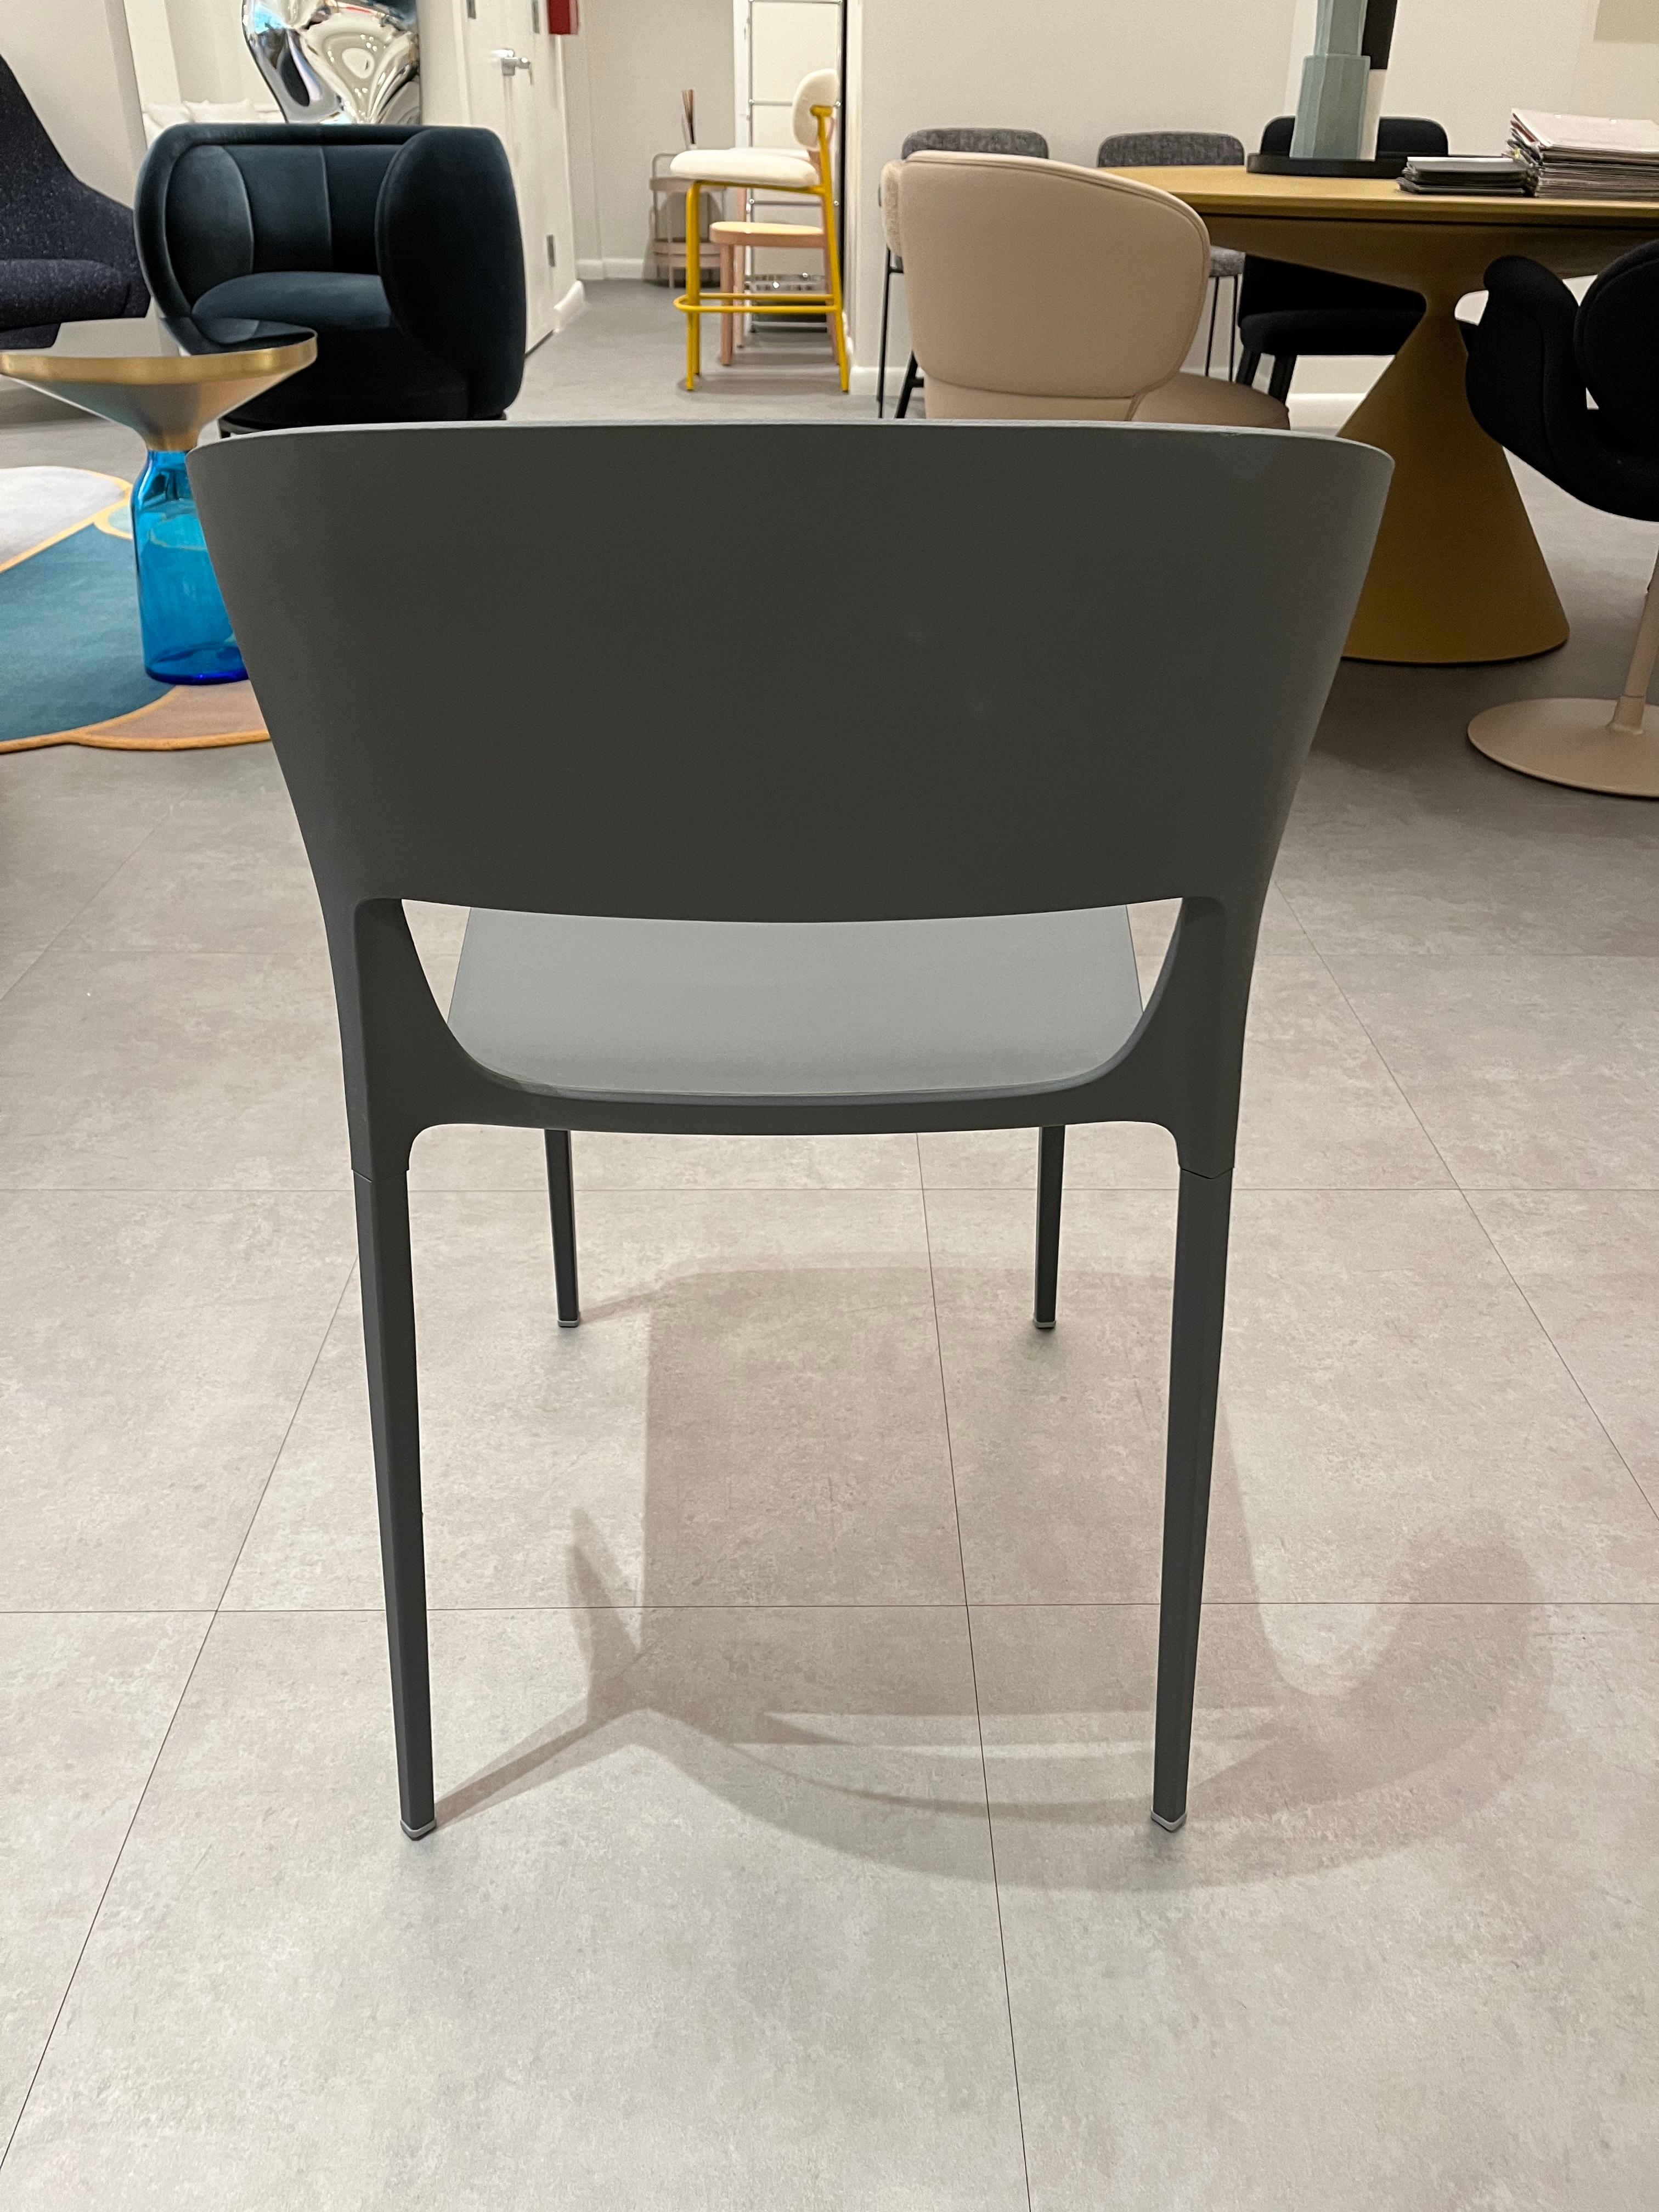 Koki
Pocci + Dondoli · 2015
MATERIAL: integral polyurethane
The contract world enters the domestic space with the Koki range of chairs  with a contemporary, fresh design. A perfect balance of form, function and innovation, fascinating from any